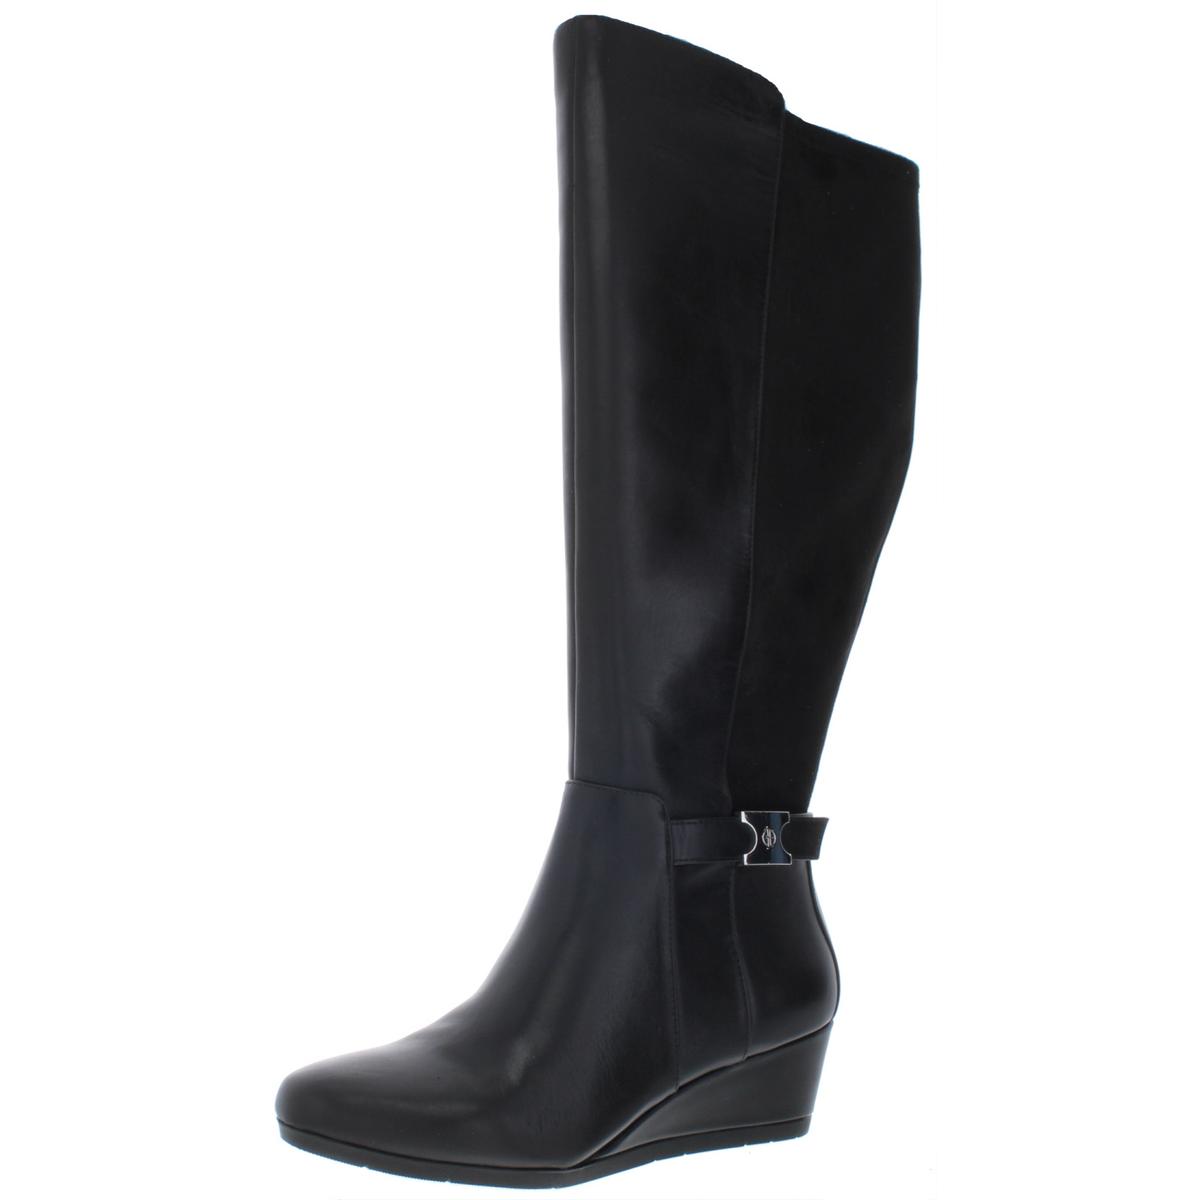 Black Wedge Boots Shoes 